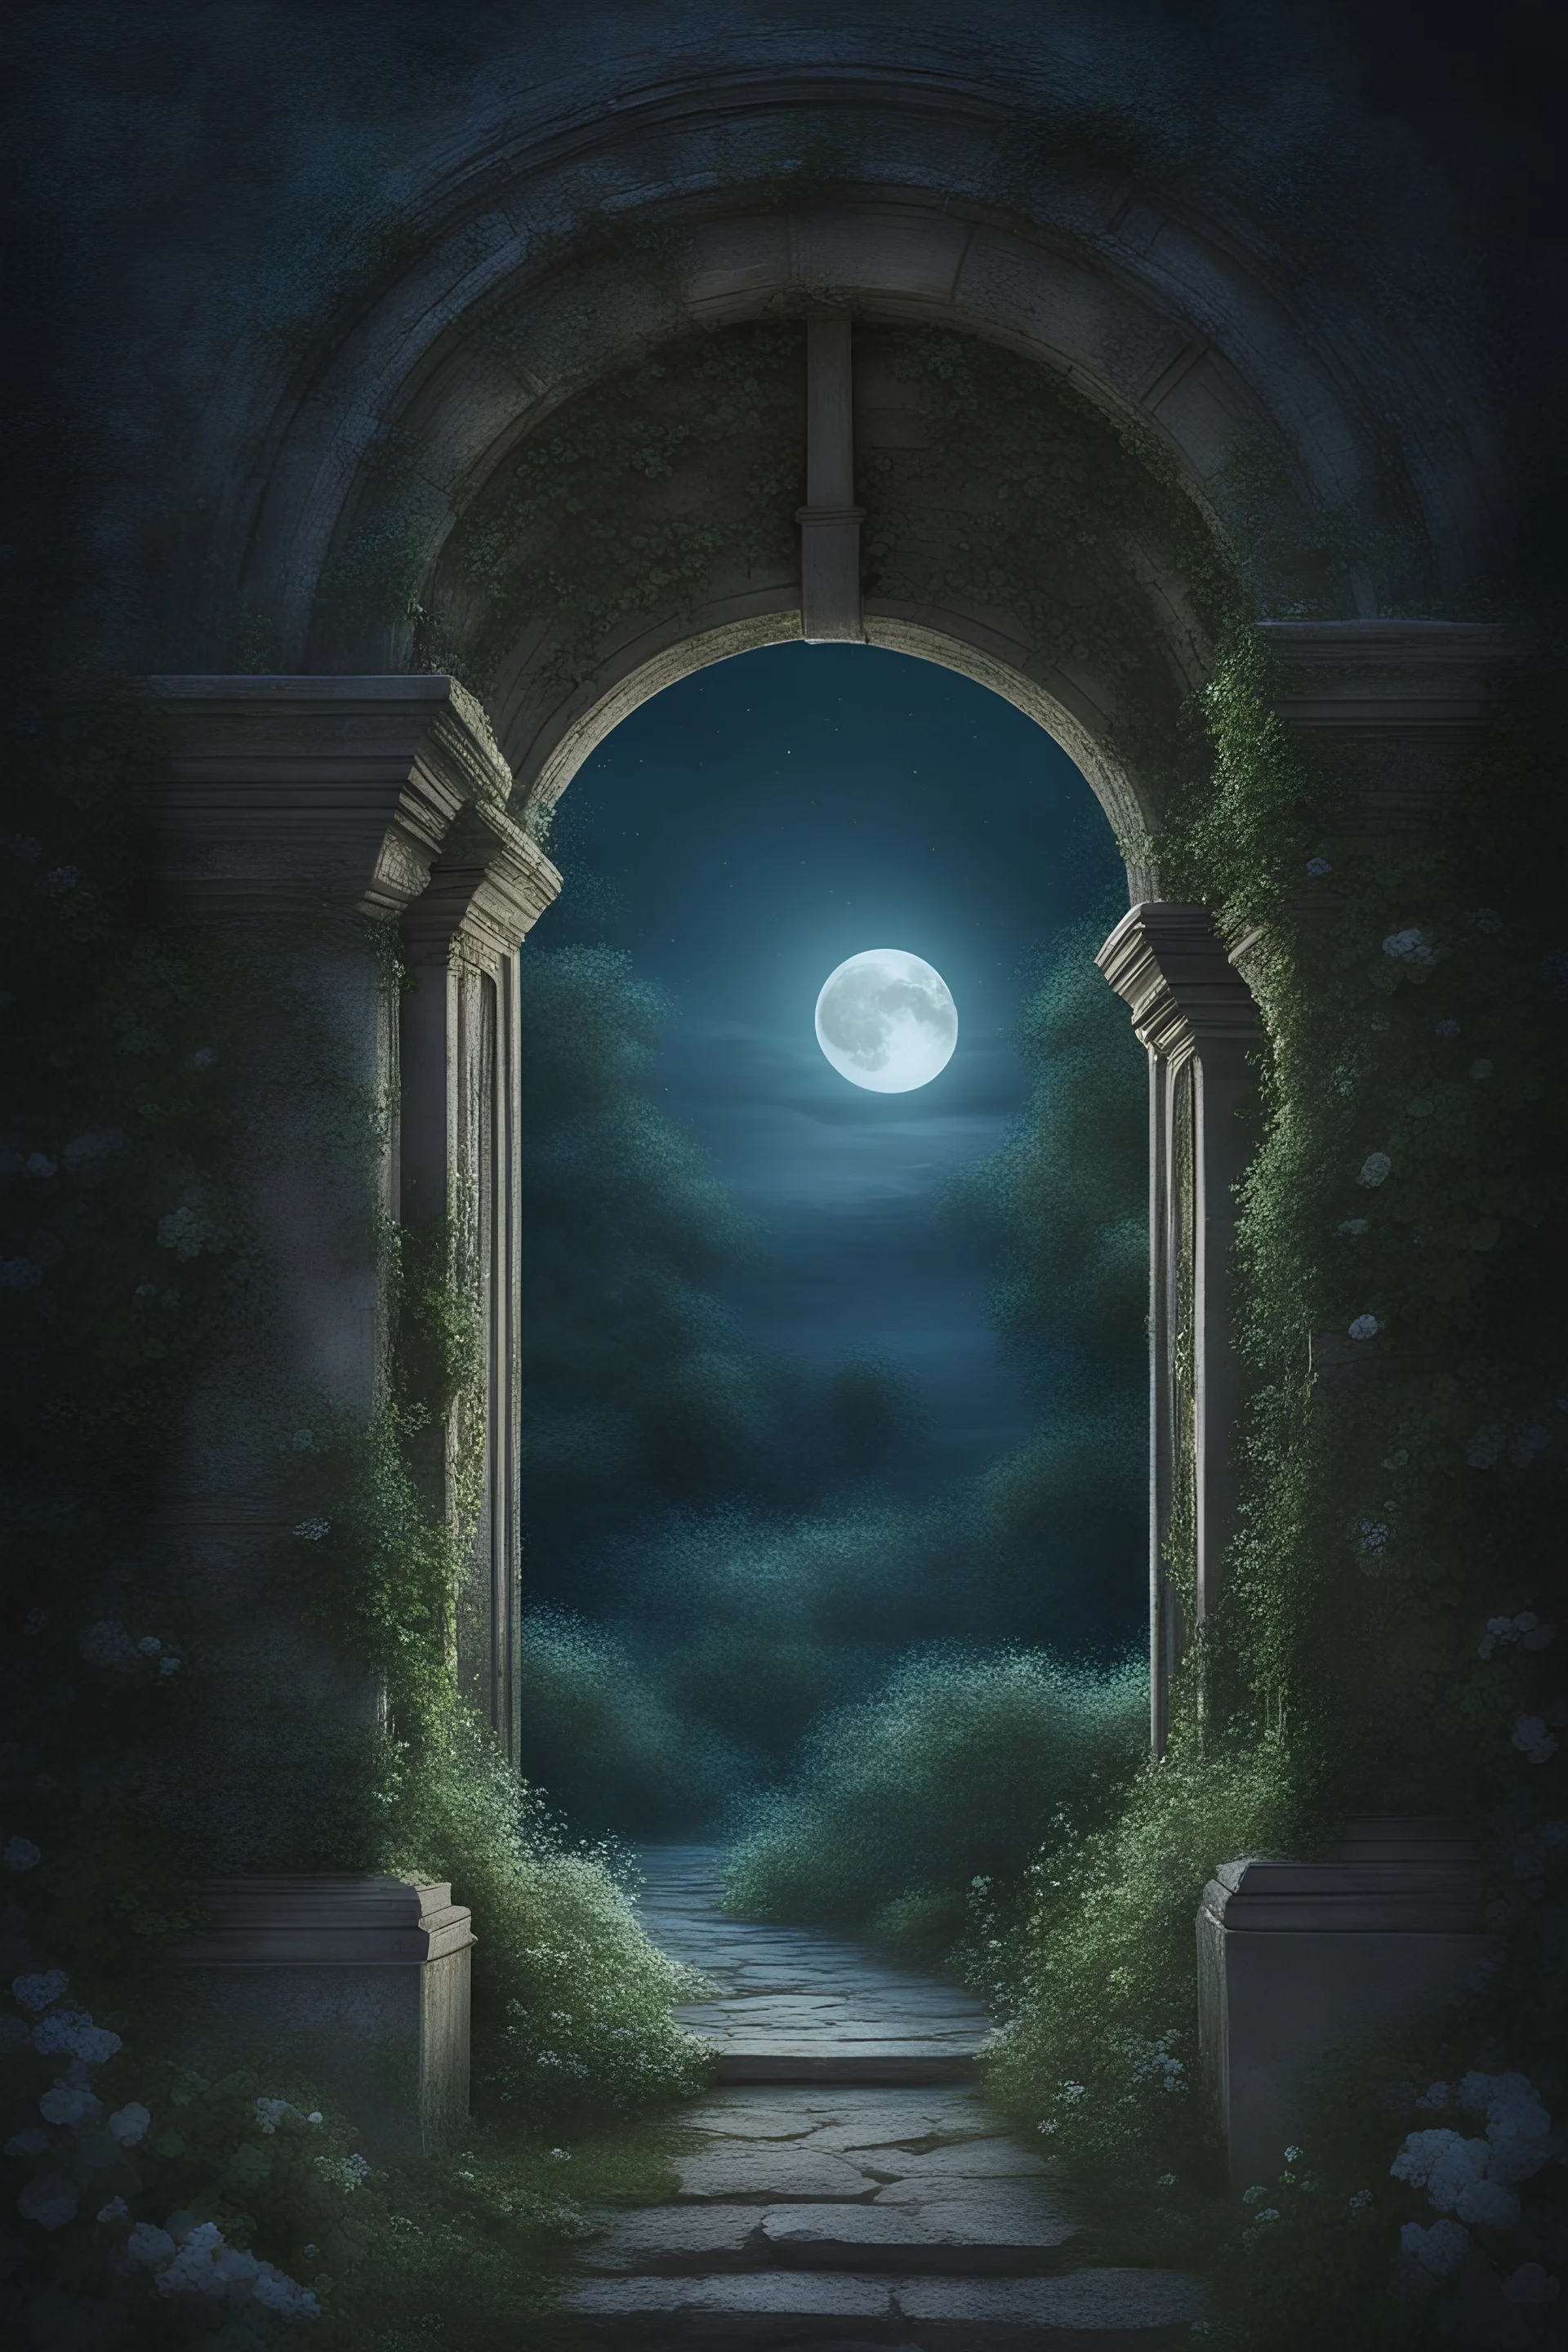 An old stone archway covered with vines and flowers in a garden, bathed in moonlight, full moon beyond the archway, fantasy, highly detailed, ethereal, cold and muted colors, blue and green tones, dreamlike